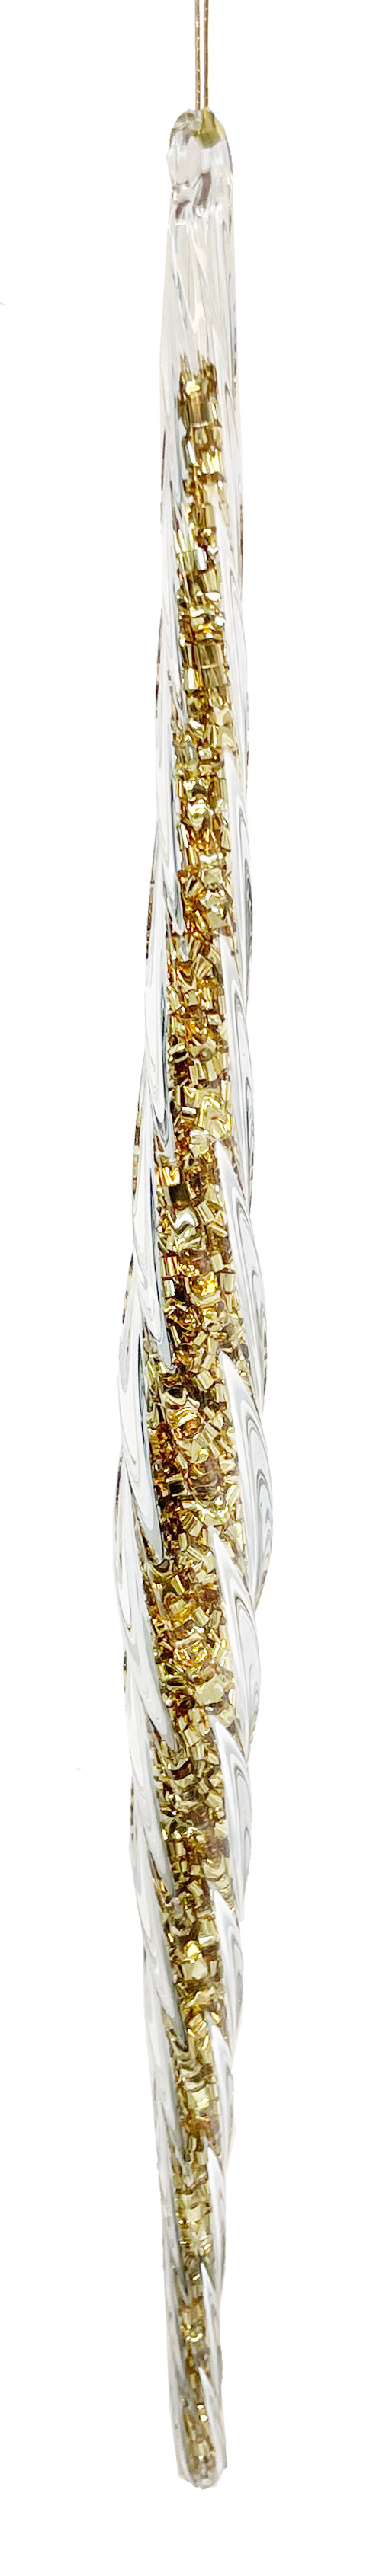 62858 Glass Swirl Icicle Gold Flakes